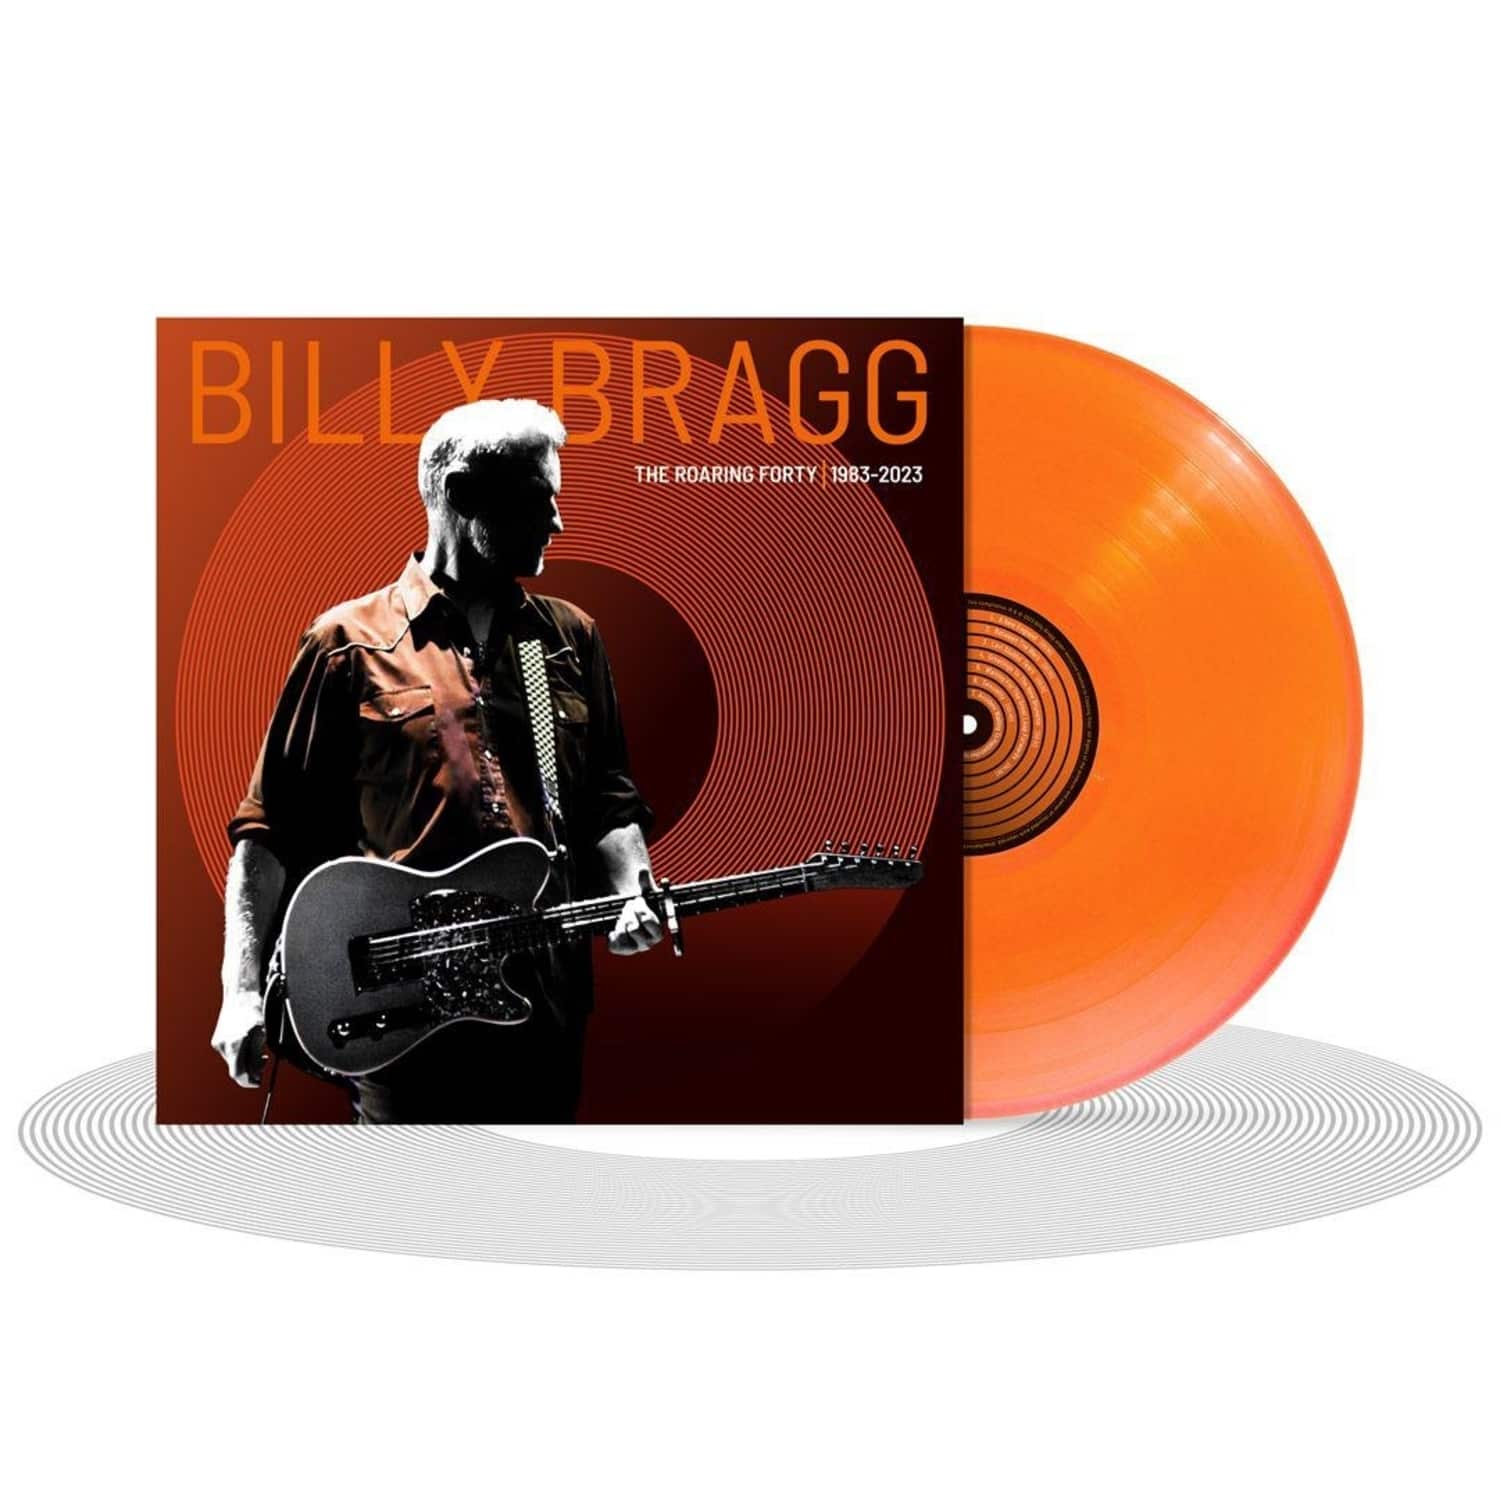 Billy Bragg - THE ROARING FORTY 